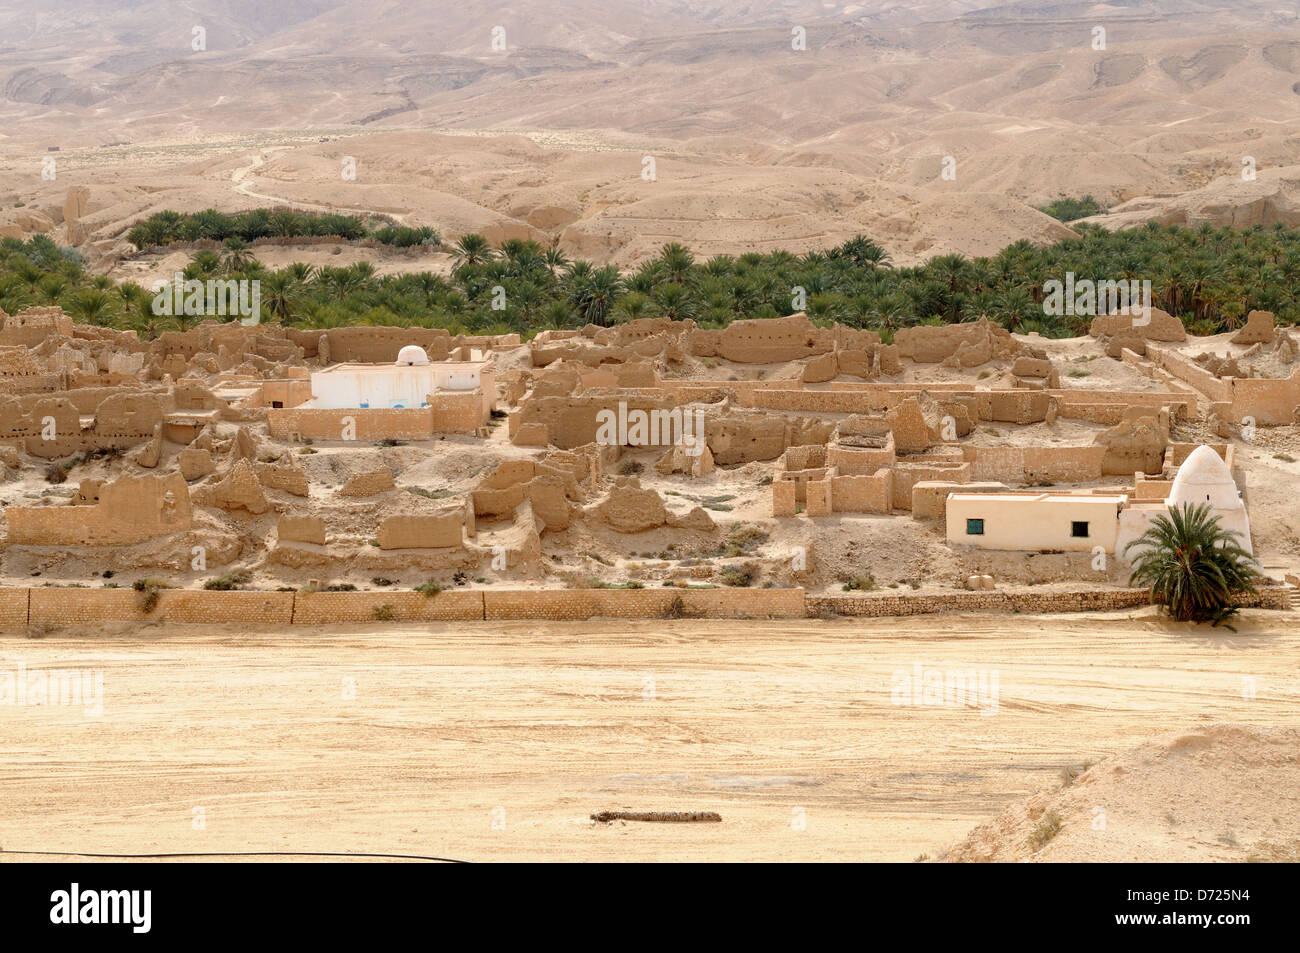 Old walled  oasis town of Tamerza destroyed by floods Tunisia Stock Photo